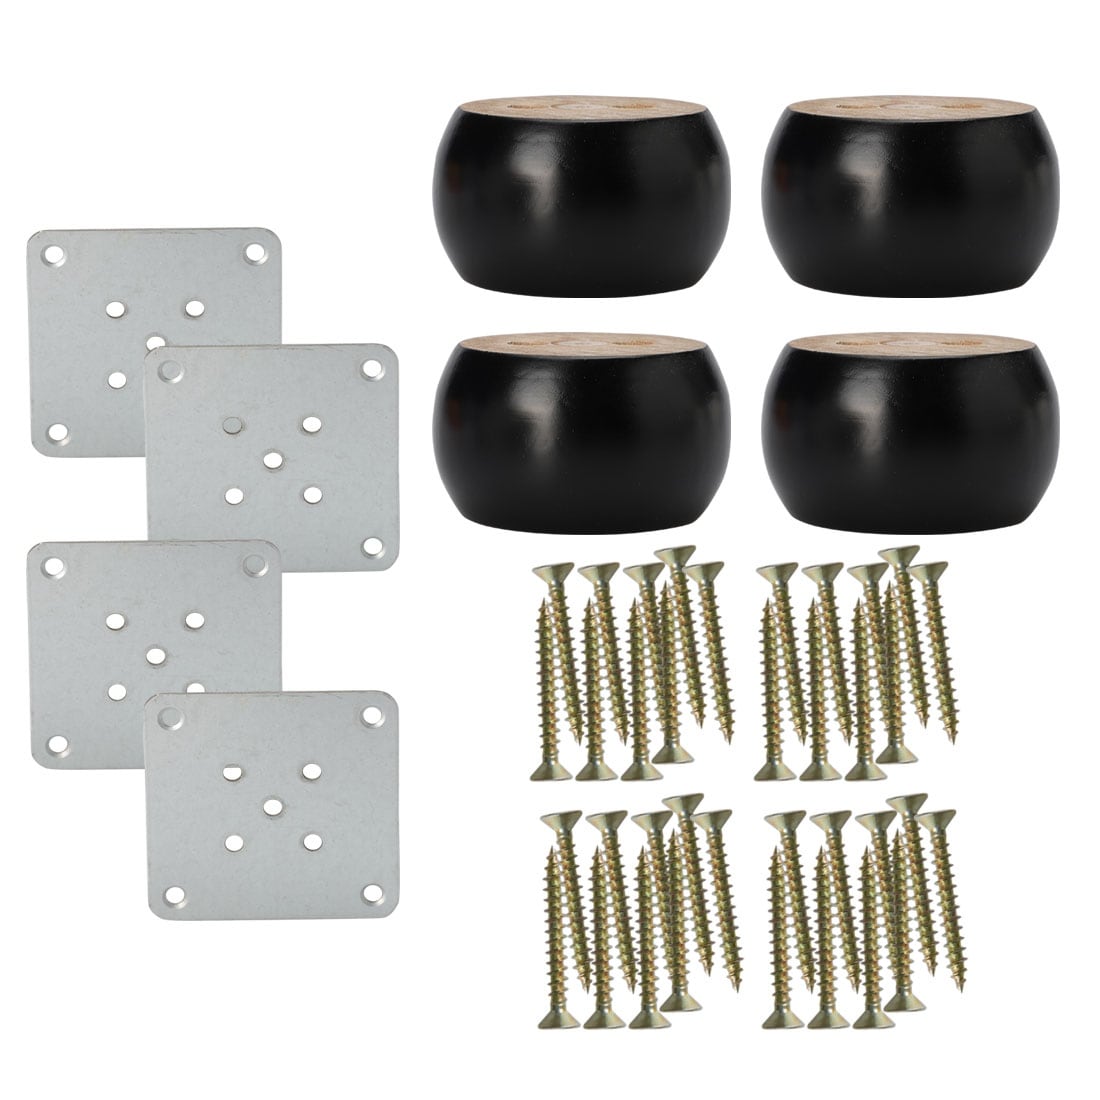 with Screws Solid Wooden Furniture Feet,Heavy Duty Furniture Legs,Unfinished Bun Feet for Cabinet Sofa Ottoman Tv Stand Loveseat Dresser,Easy to Install Wood Legs for Furniture,Set of 4